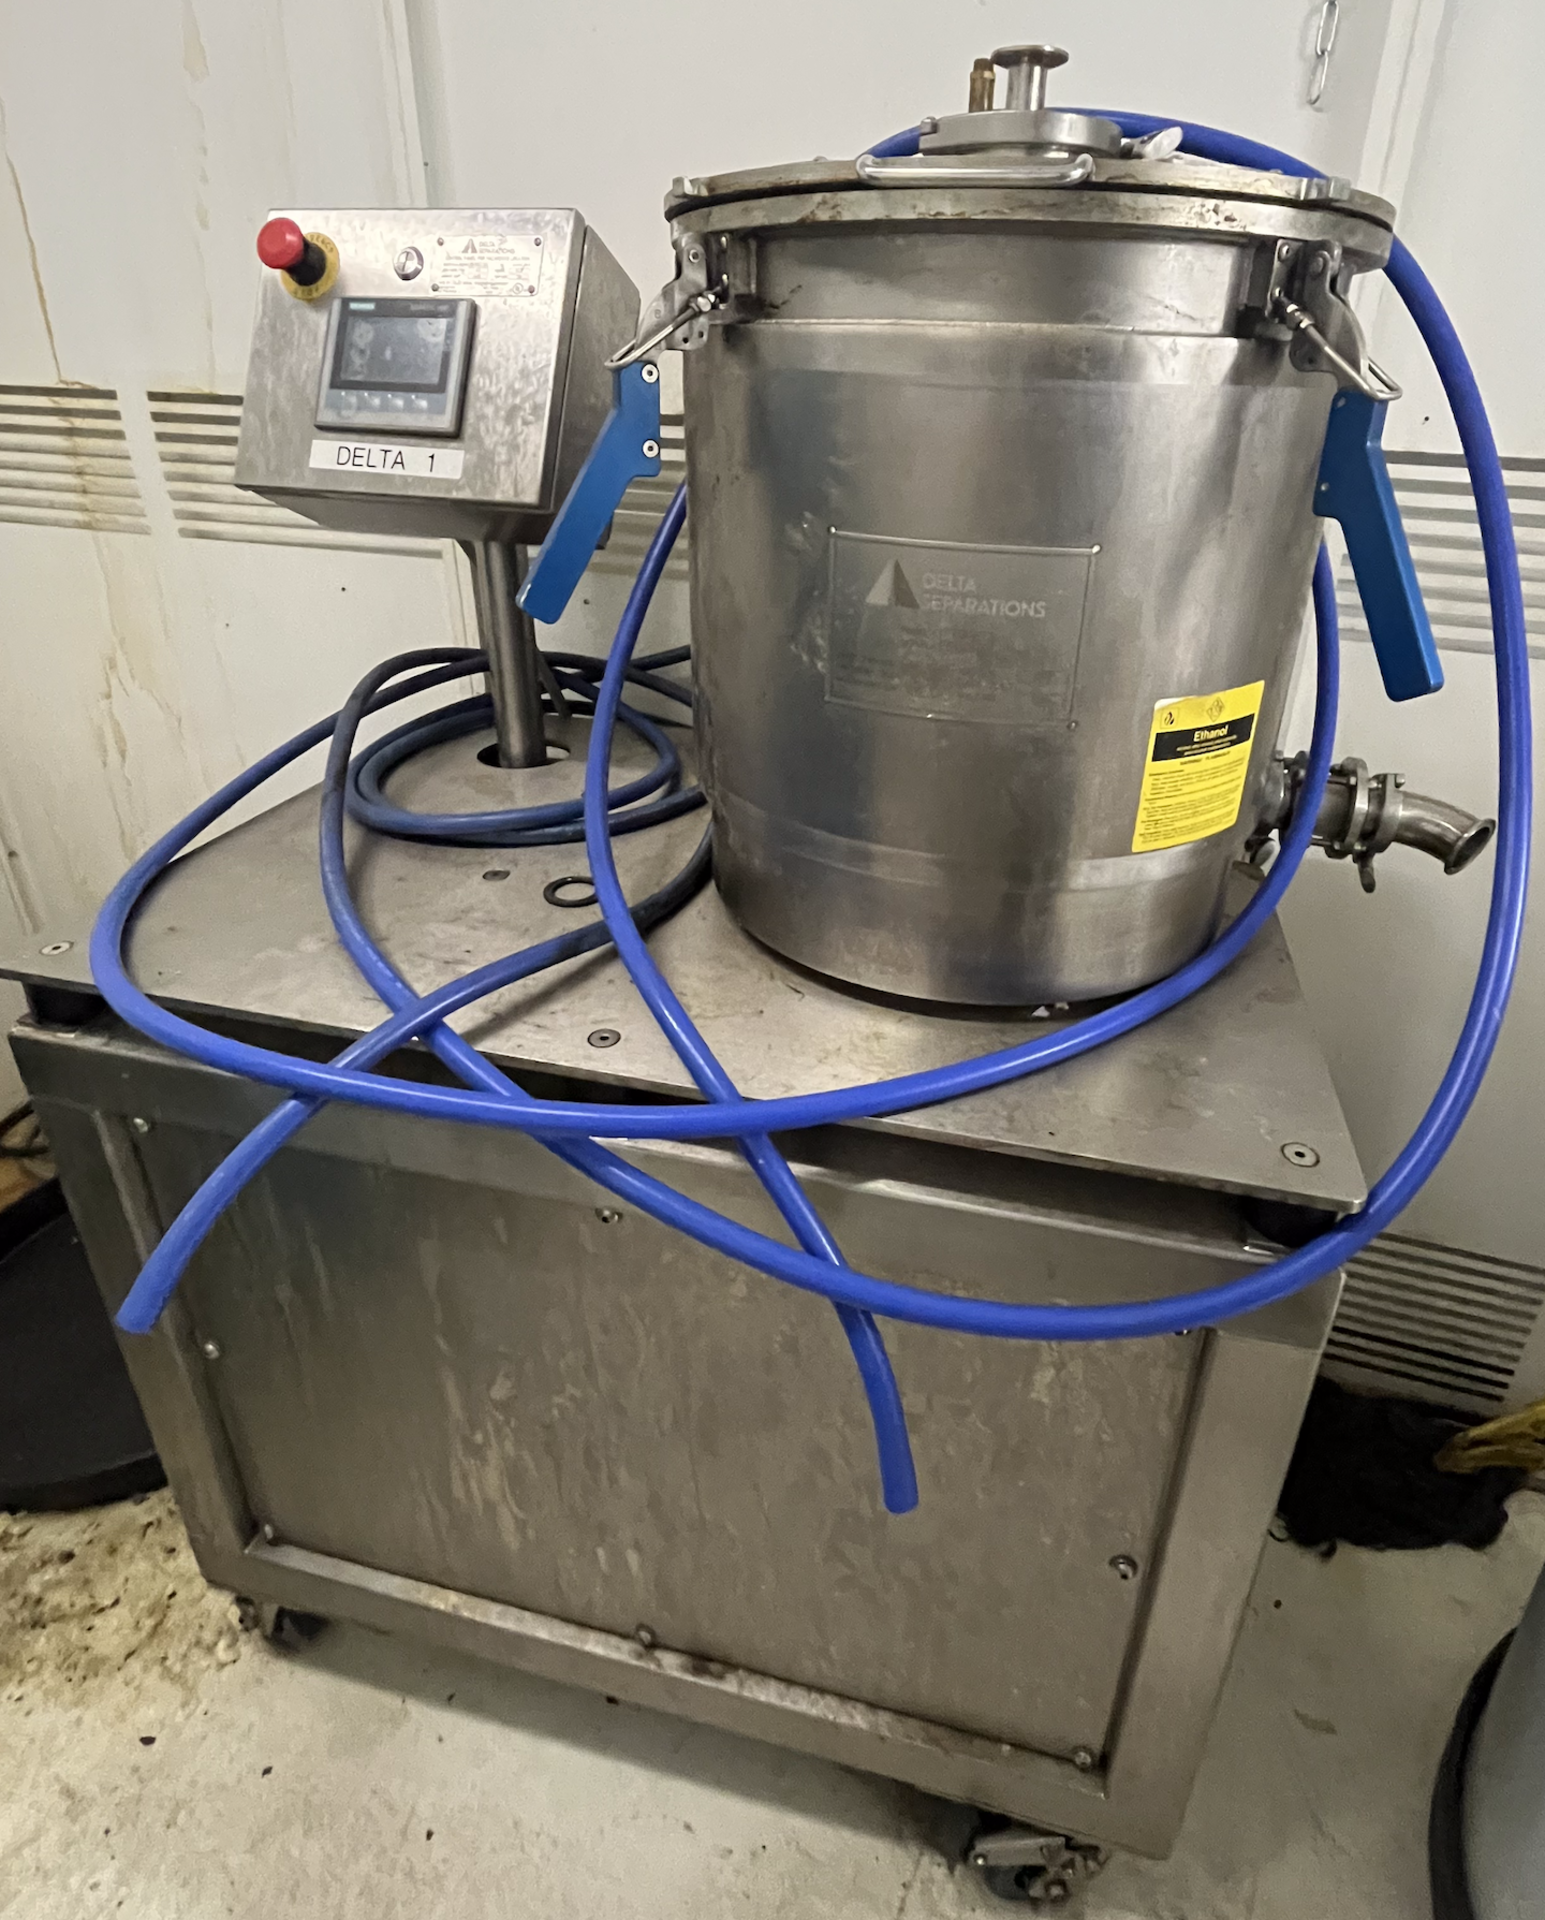 Used- Delta Separations CUP-15 Ethanol Alcohol Extraction System w/ Cryo Ethanol Chilling System